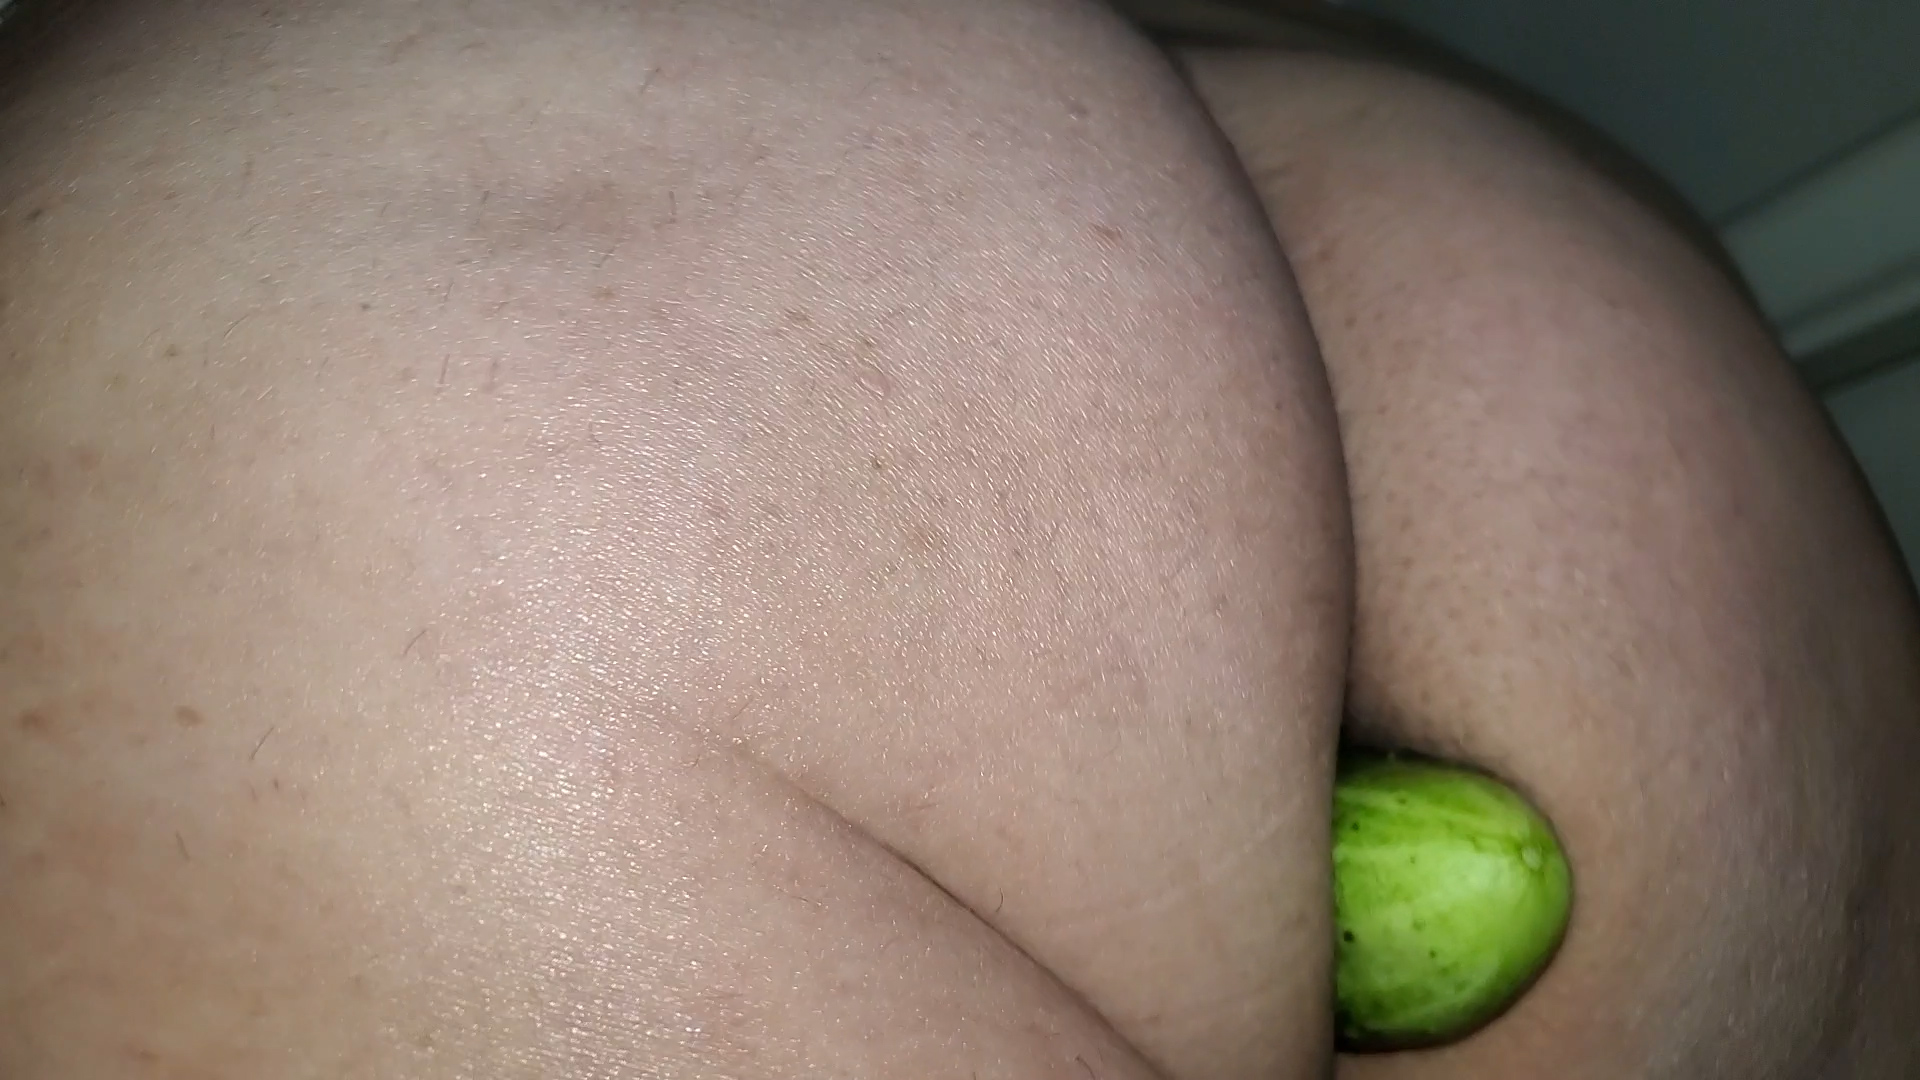 Anal 4 - Trying to Hold Cucumber in My Butt While Walki